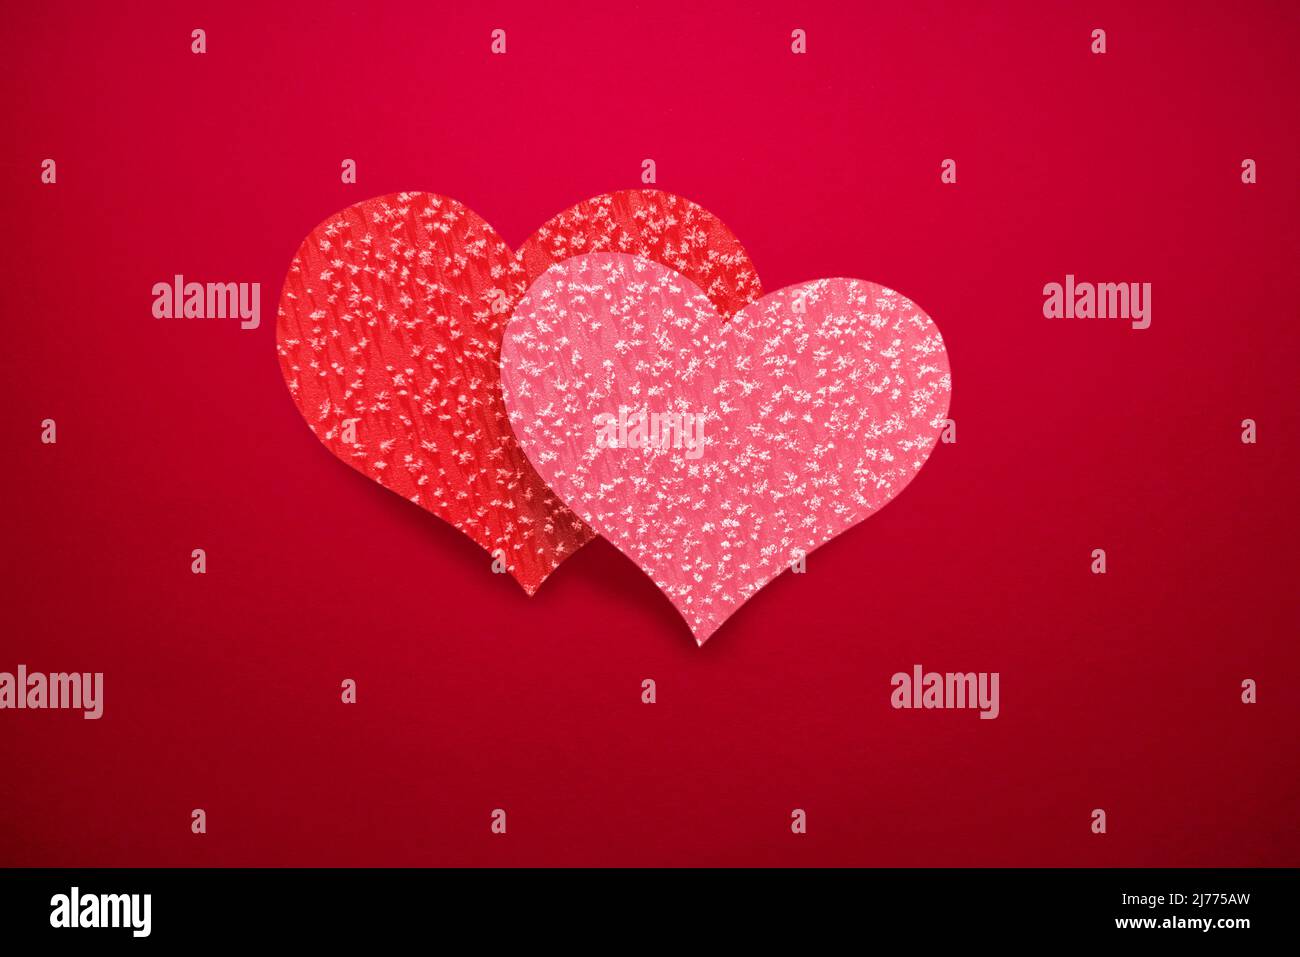 Red background with double hearts (red and pink), romantic background for Valentine's Day or wedding. Stock Photo